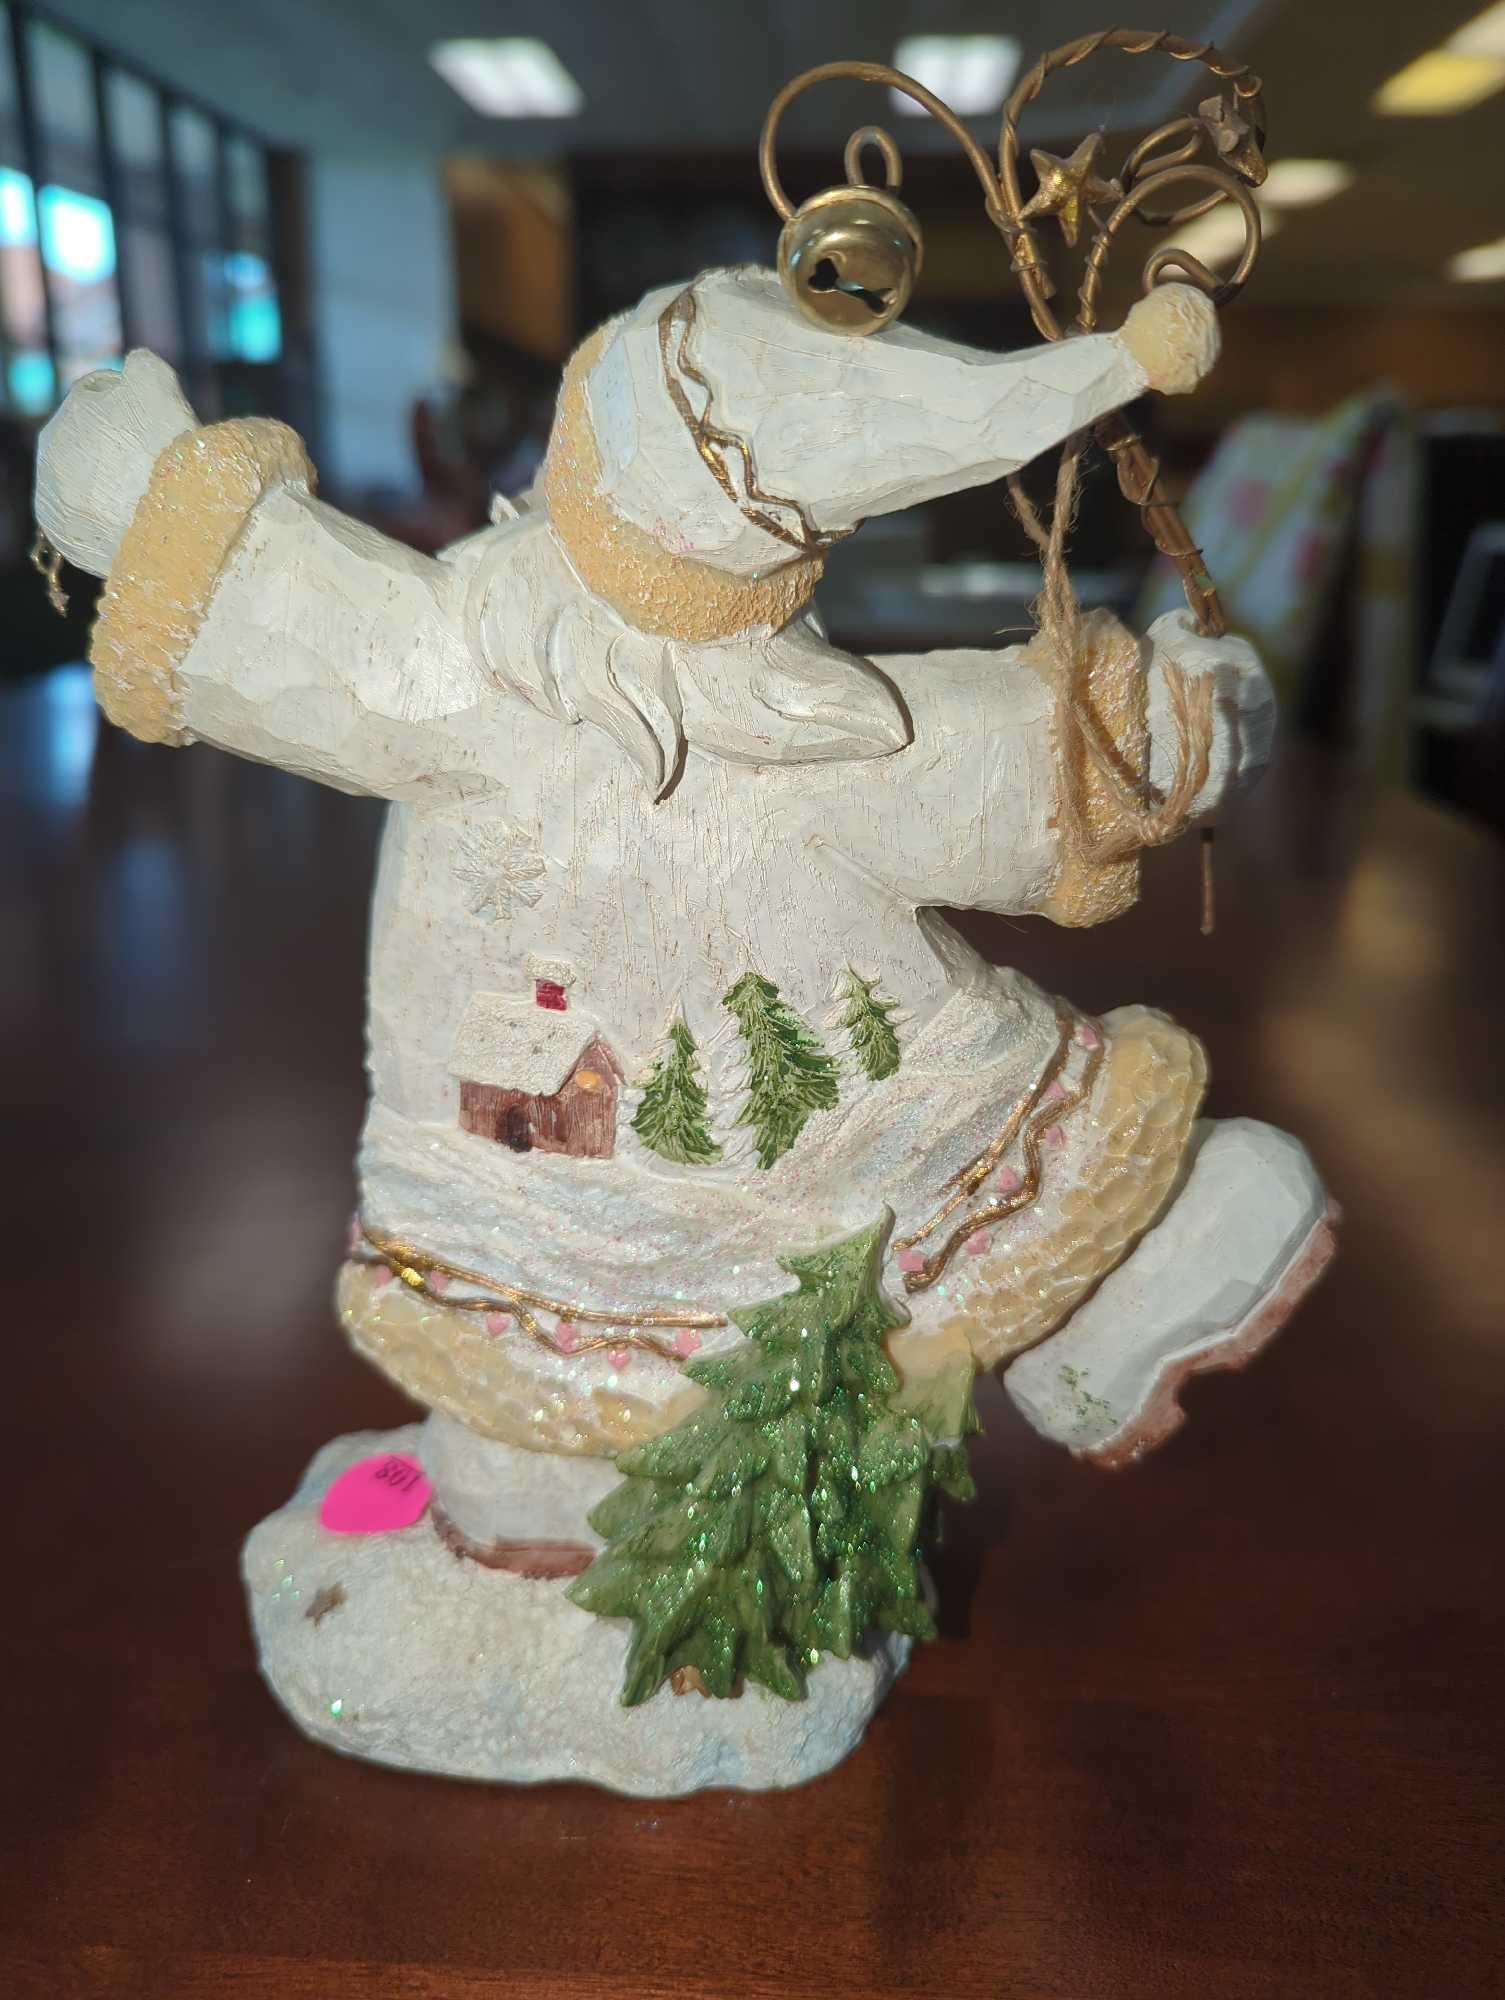 Wooden Santa Decoration, Approximate Dimensions - 9" H x 7" W x 3" D, What You See in the Photos is